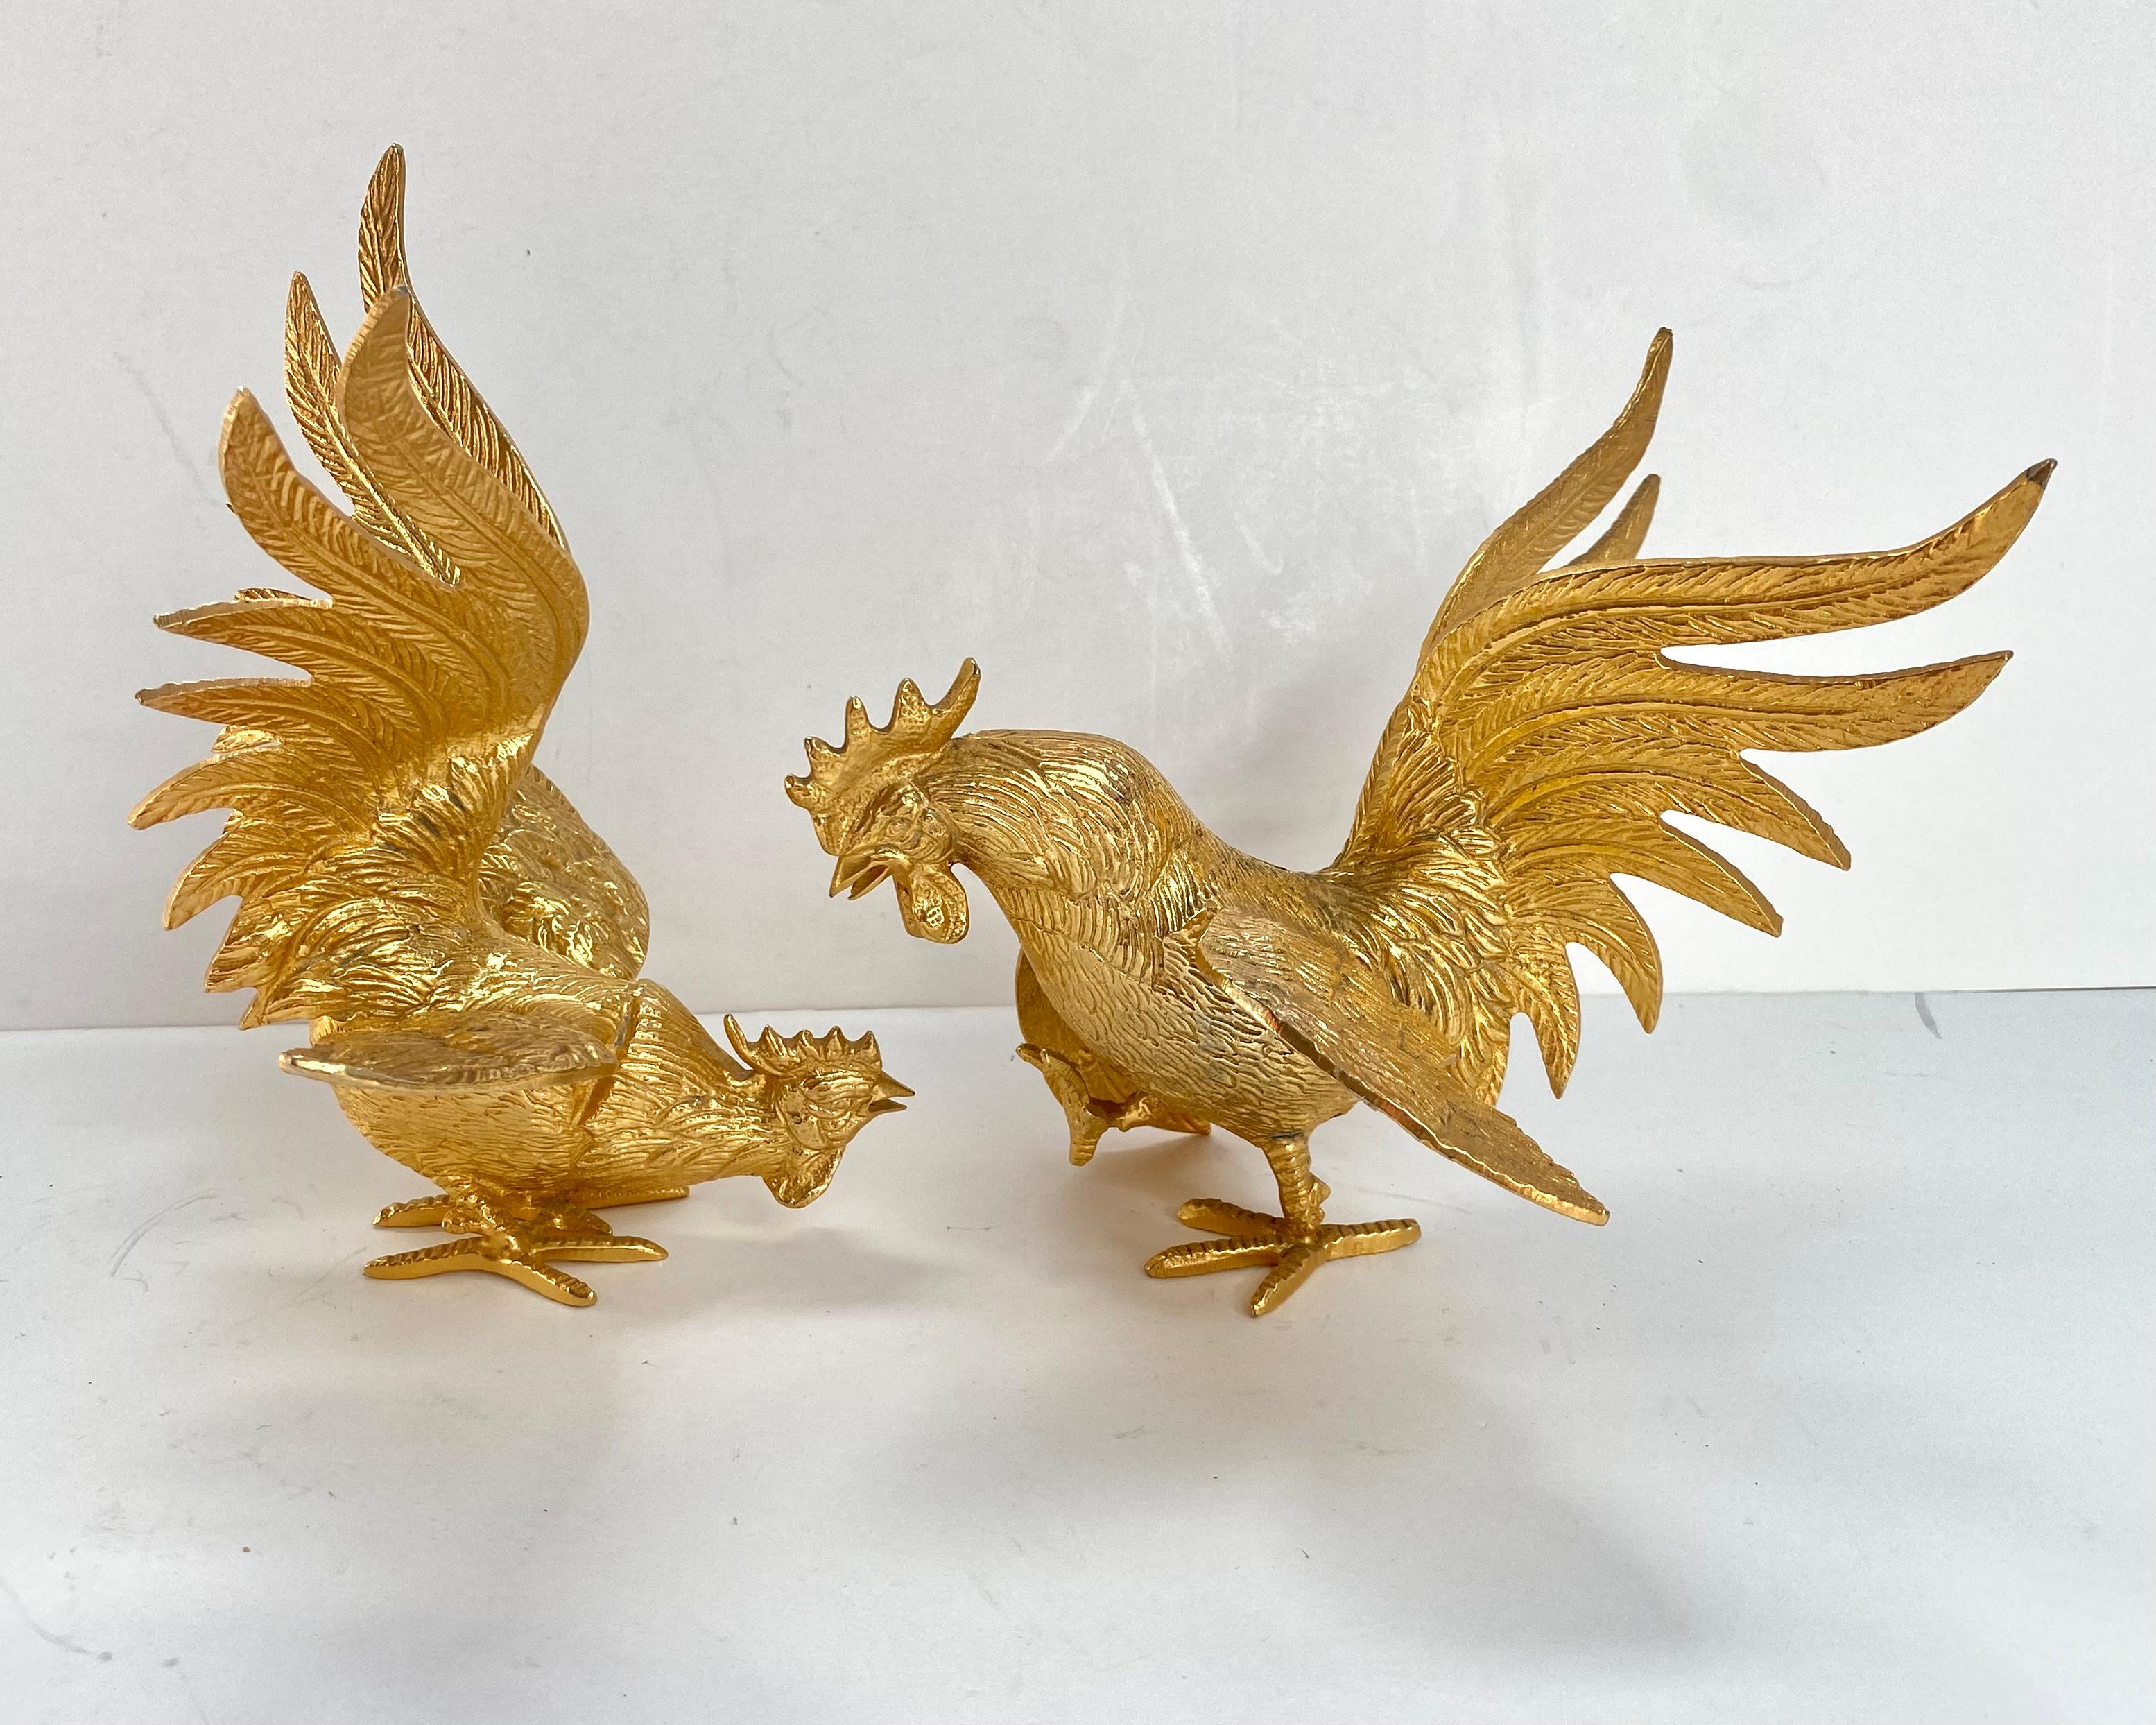 Beautifully carved Gilt Metal Rooster Cock Figurines, Cock-Fights, Set 2, France, 1960s.

Highly detailed gilded metal rooster figurines.

Vintage figurines have a classic design and are handmade from natural and sustainable material which is